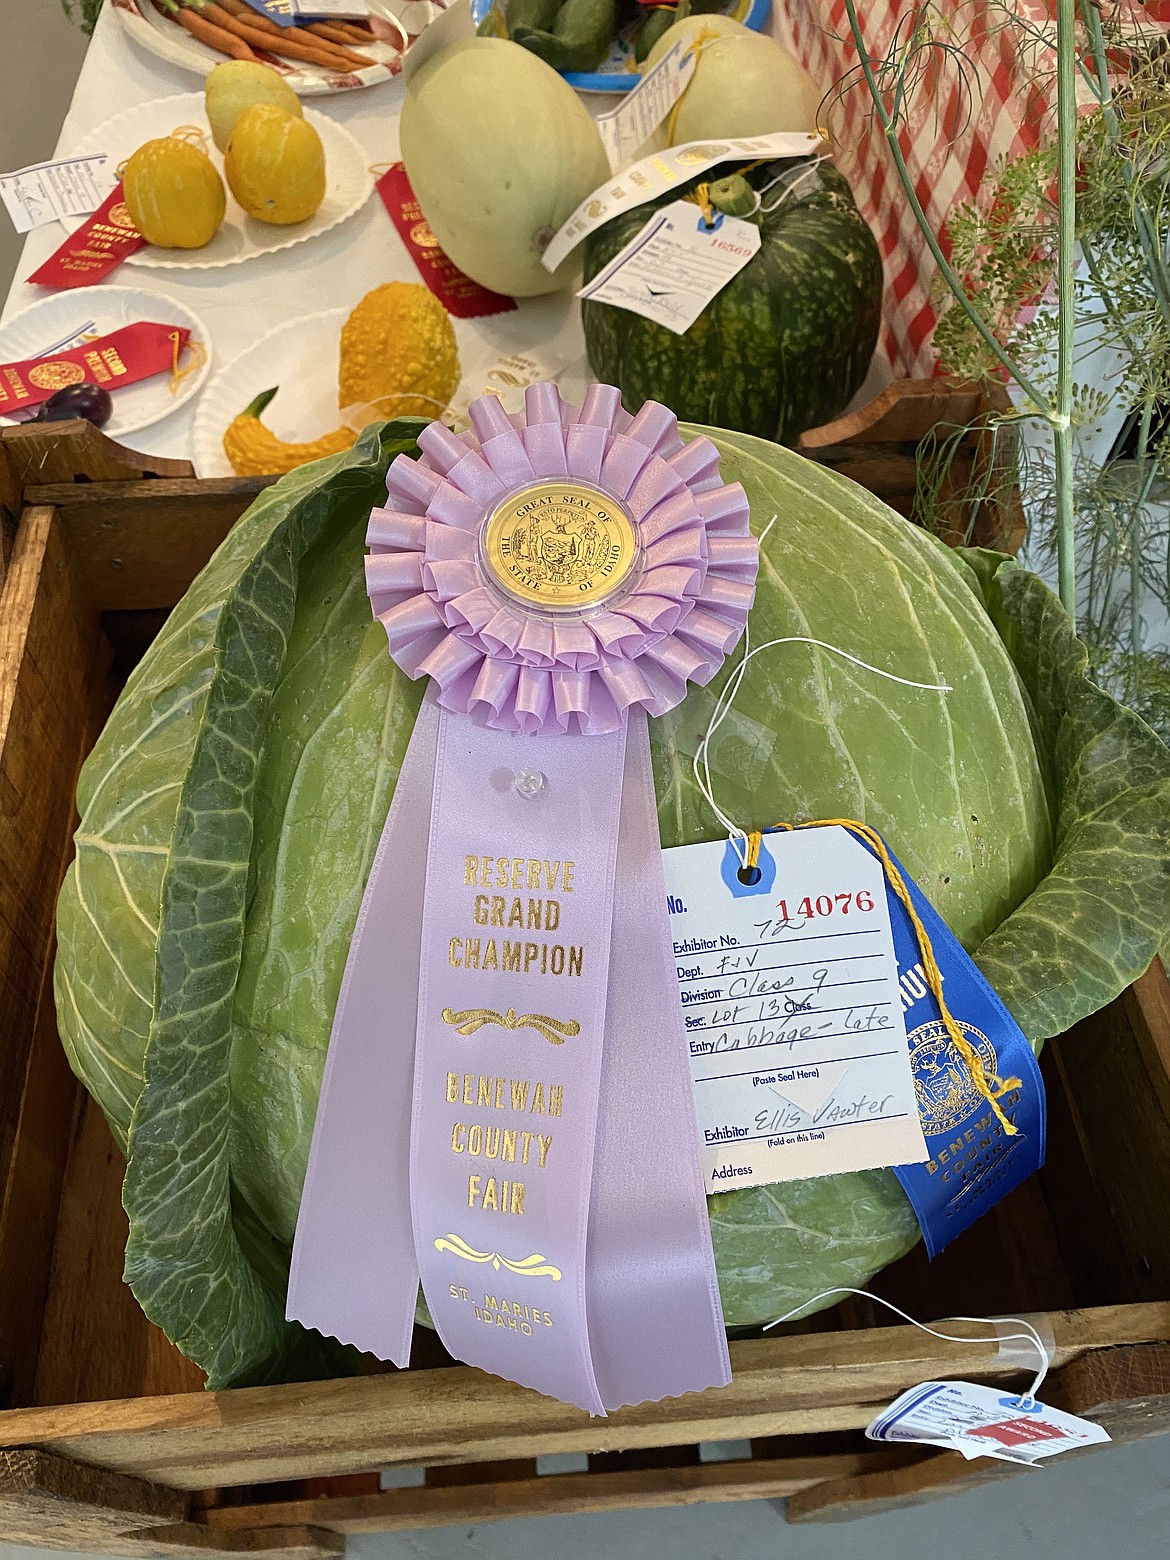 A giant cabbage won the grand champion award at the Benewah County Fair in St. Maries this weekend. (MADISON HARDY/Press)